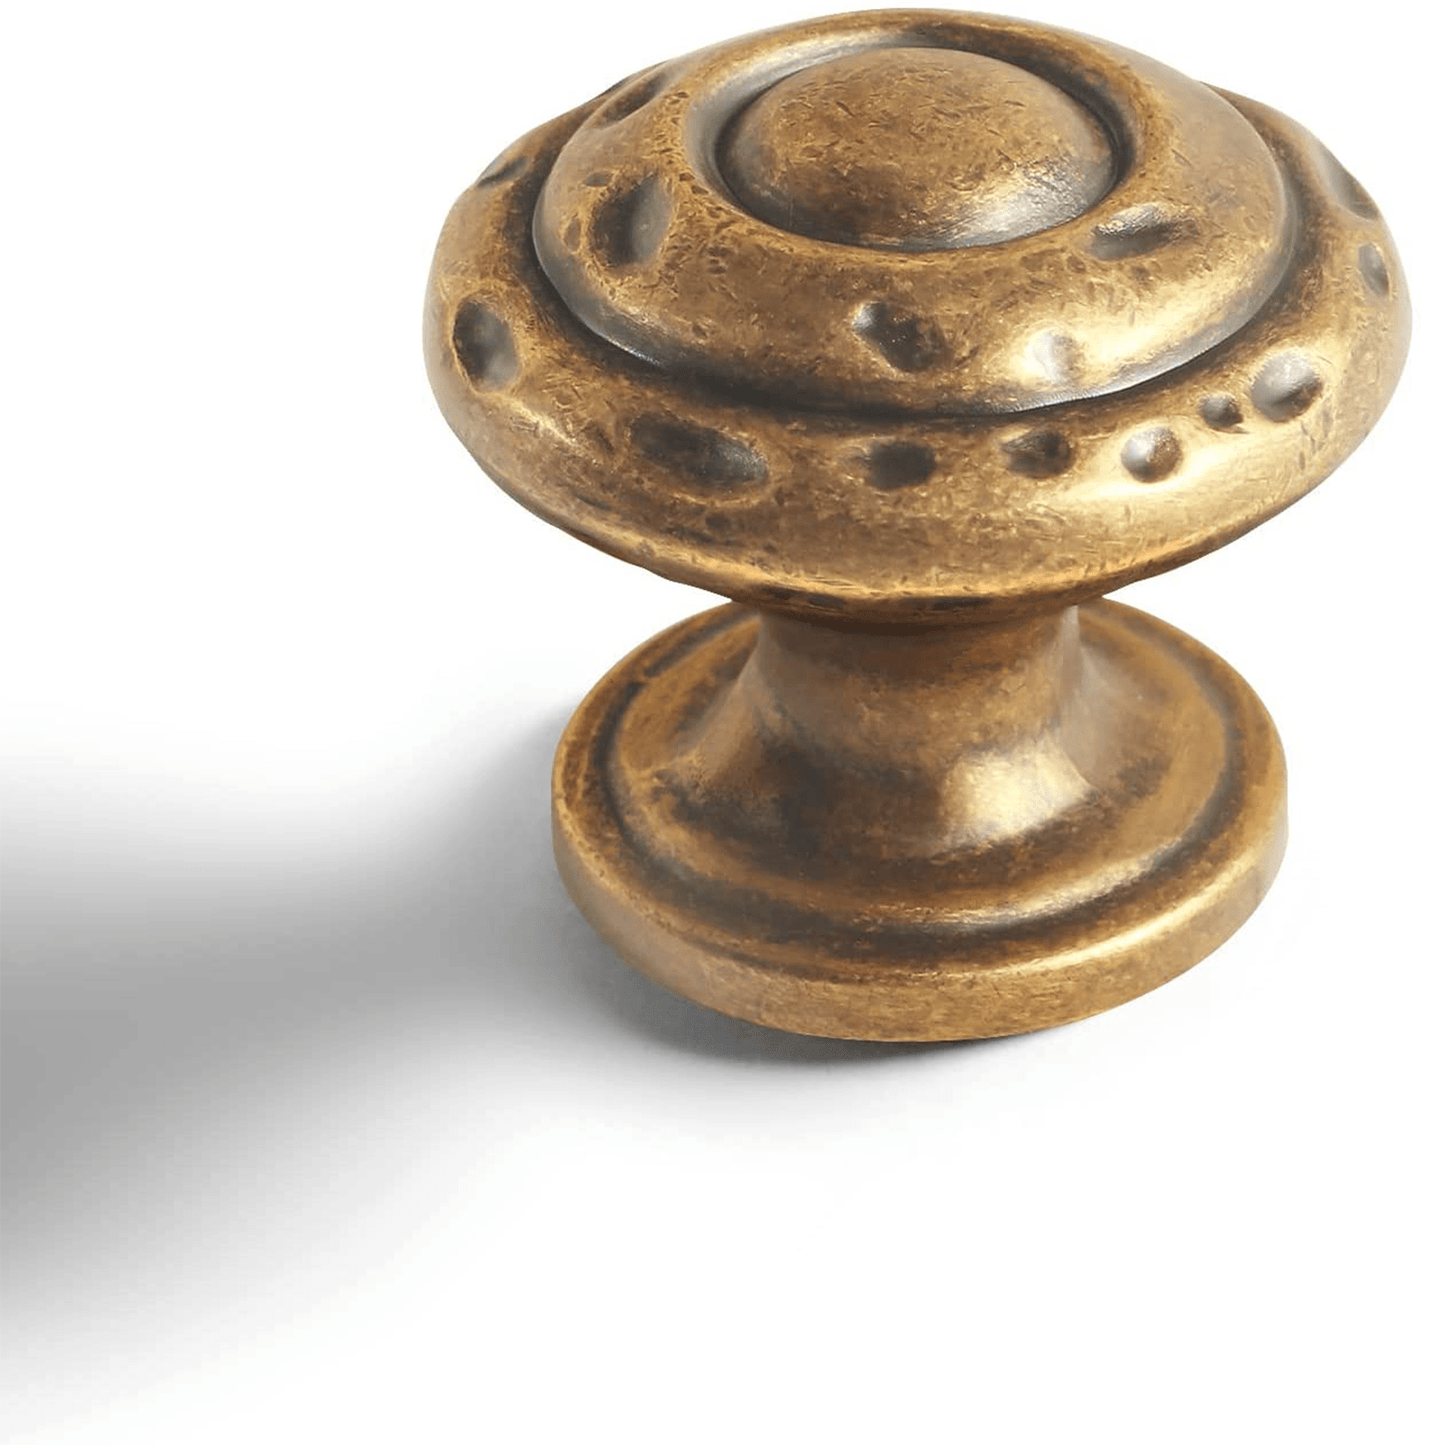 Colonial Style Antique Brass Drawer Pulls Antique Bronze Cabinet Bar Pulls 6 Pack